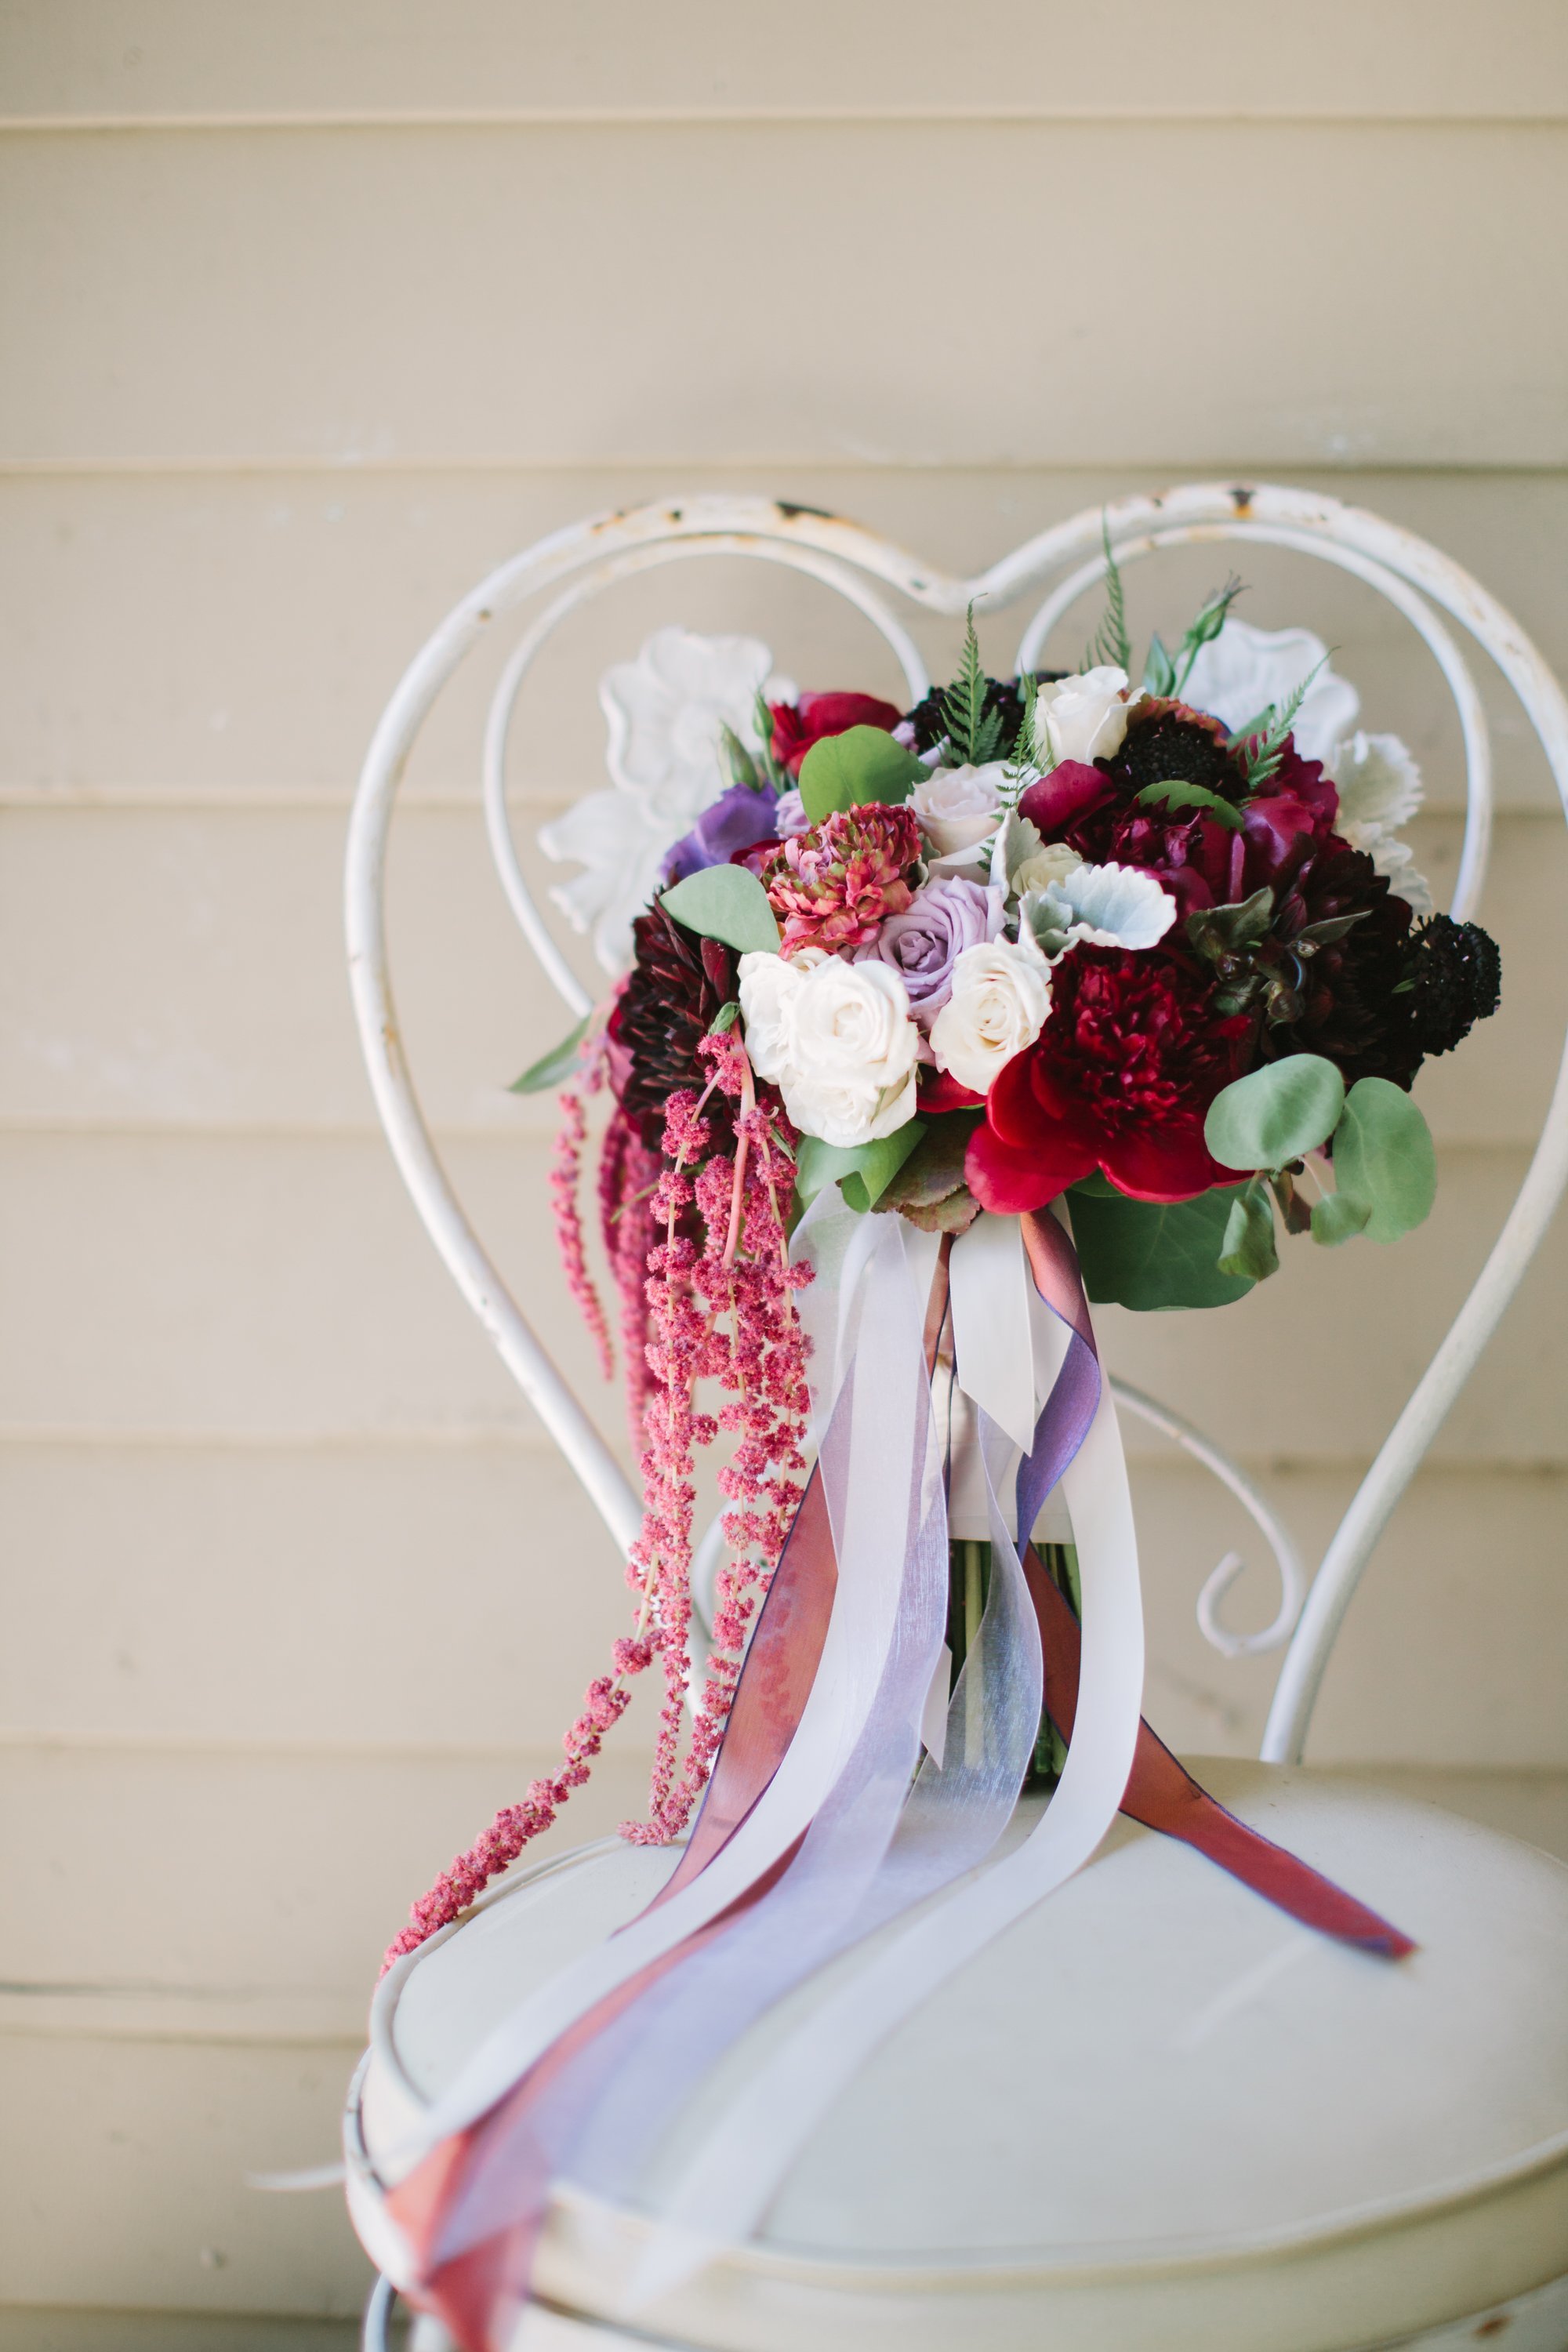 www.santabarbarawedding.com | Winter Creative Co. | A Beautiful Day Productions | Bouquet of Red and White Flowers on Heart-Shaped Chair